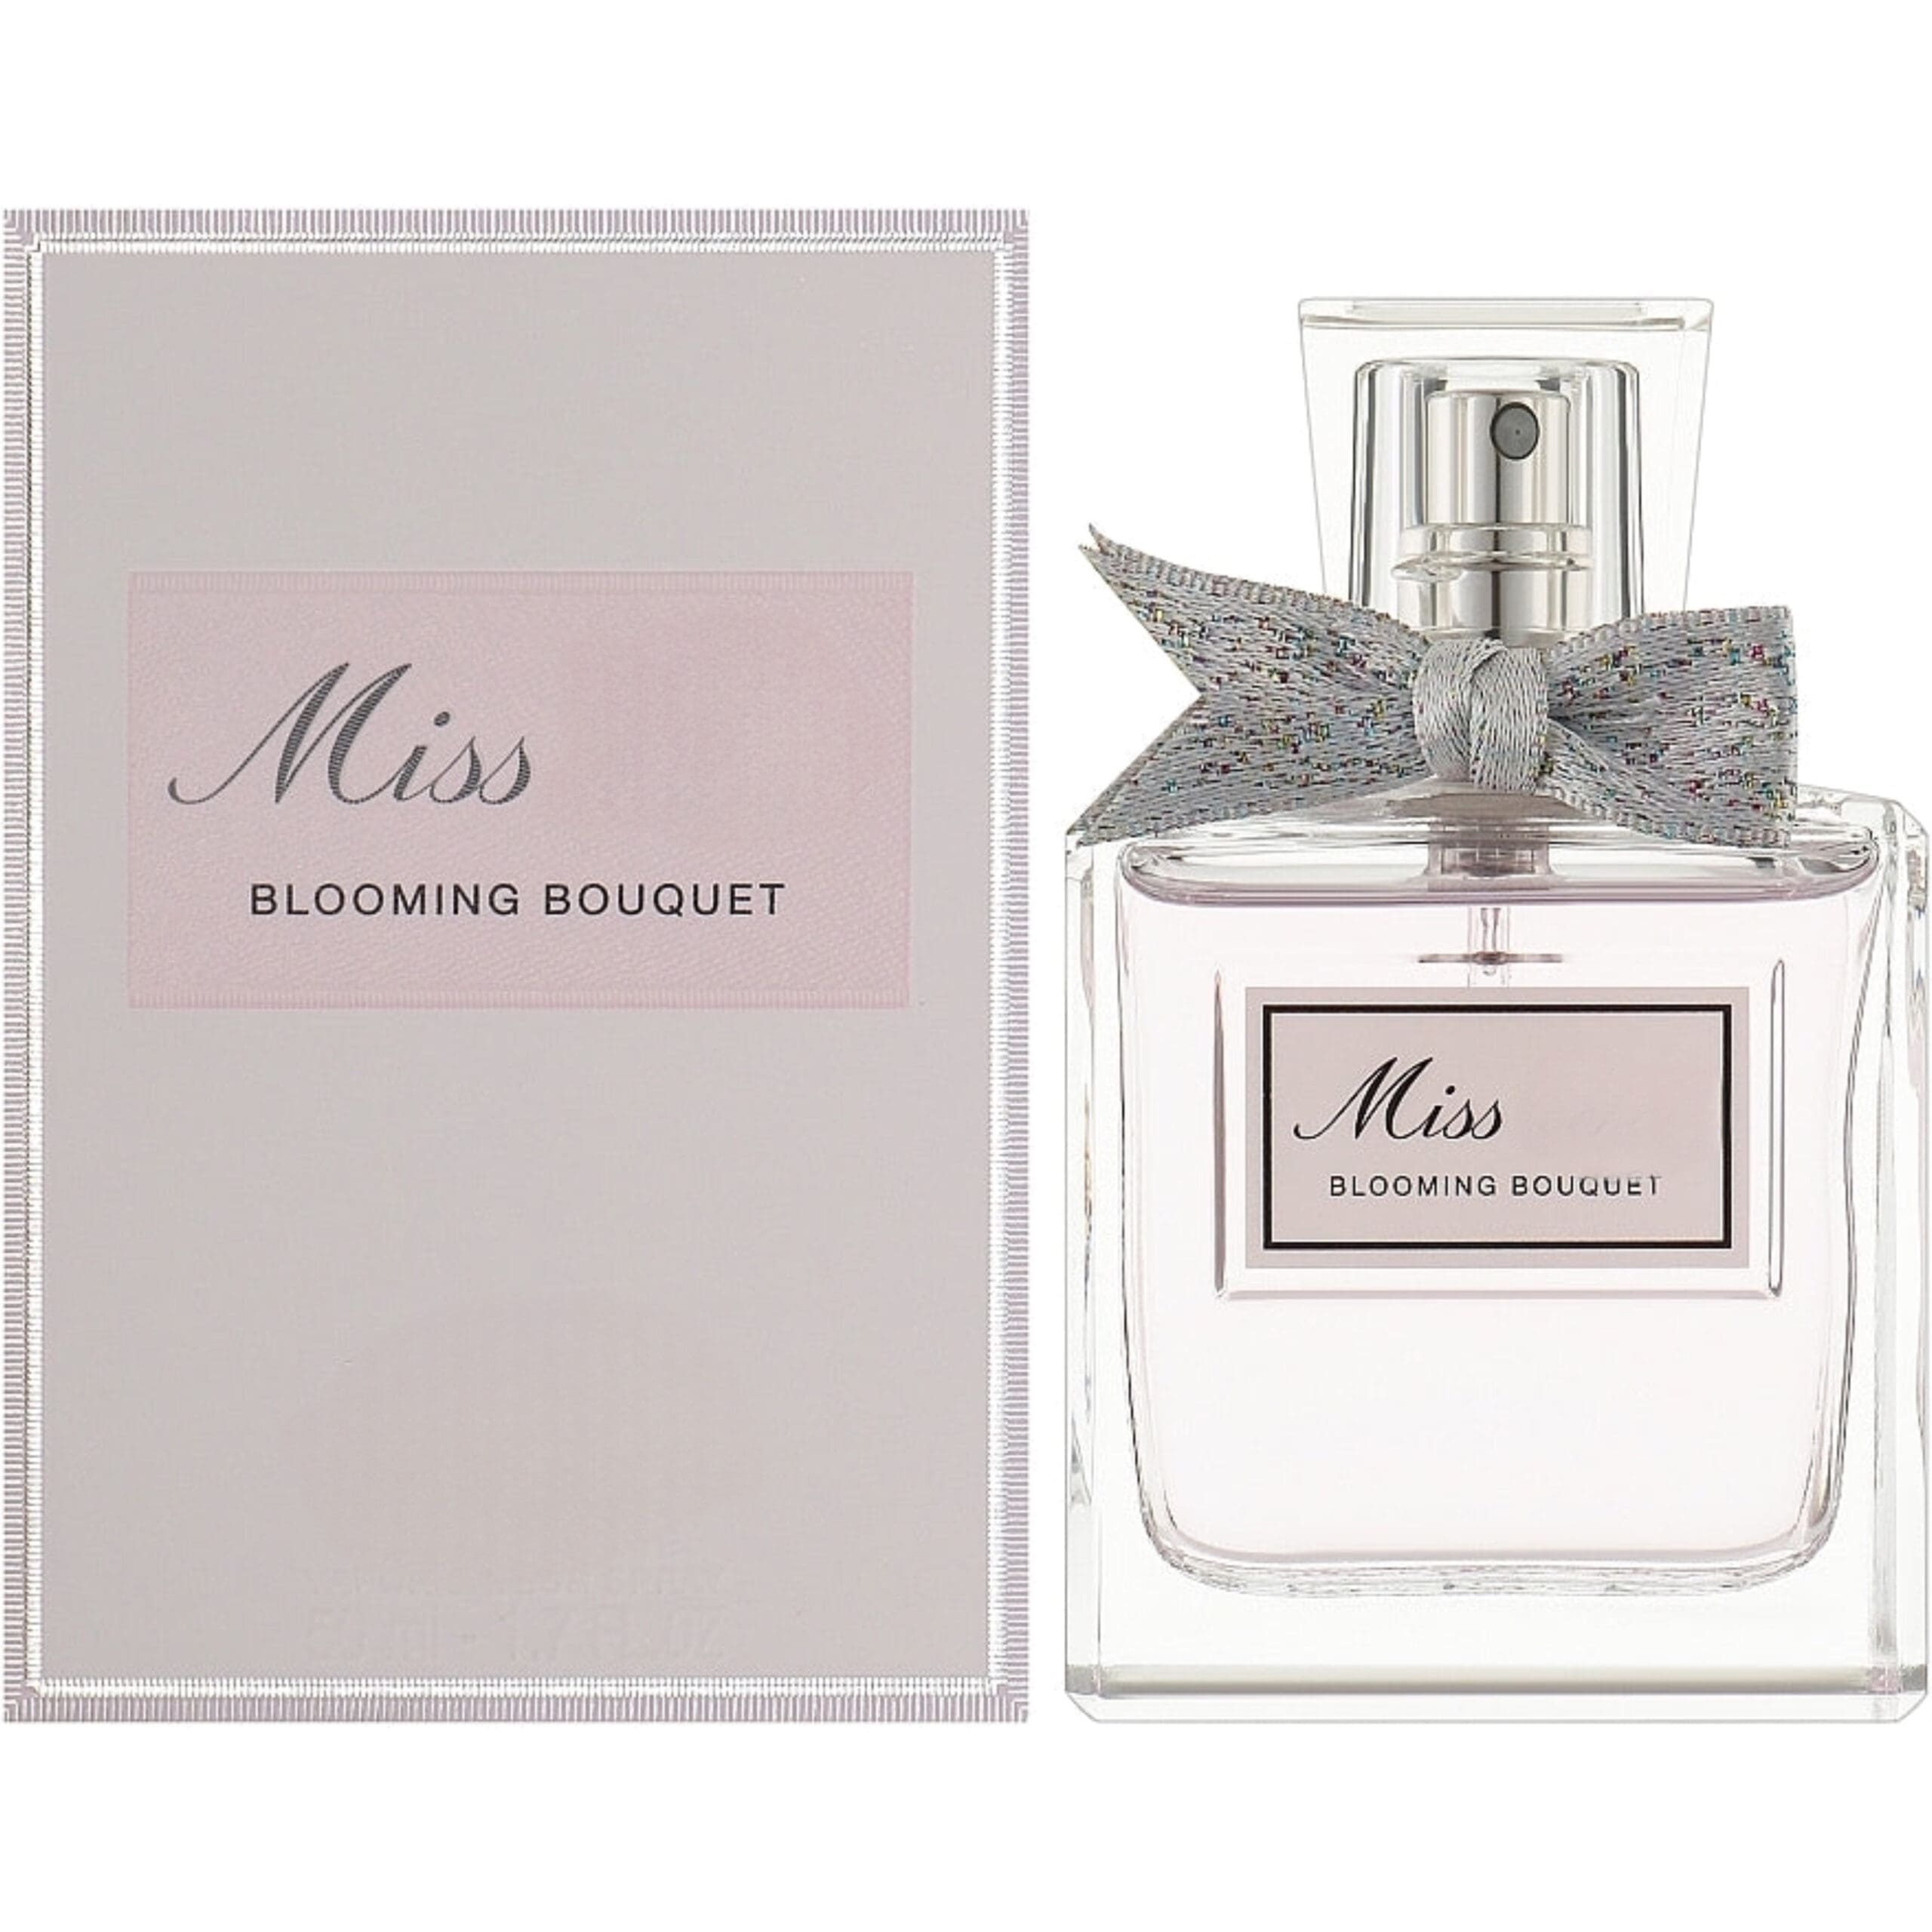 2560 MISS BLOOMING BOUQUET 100ml EDT